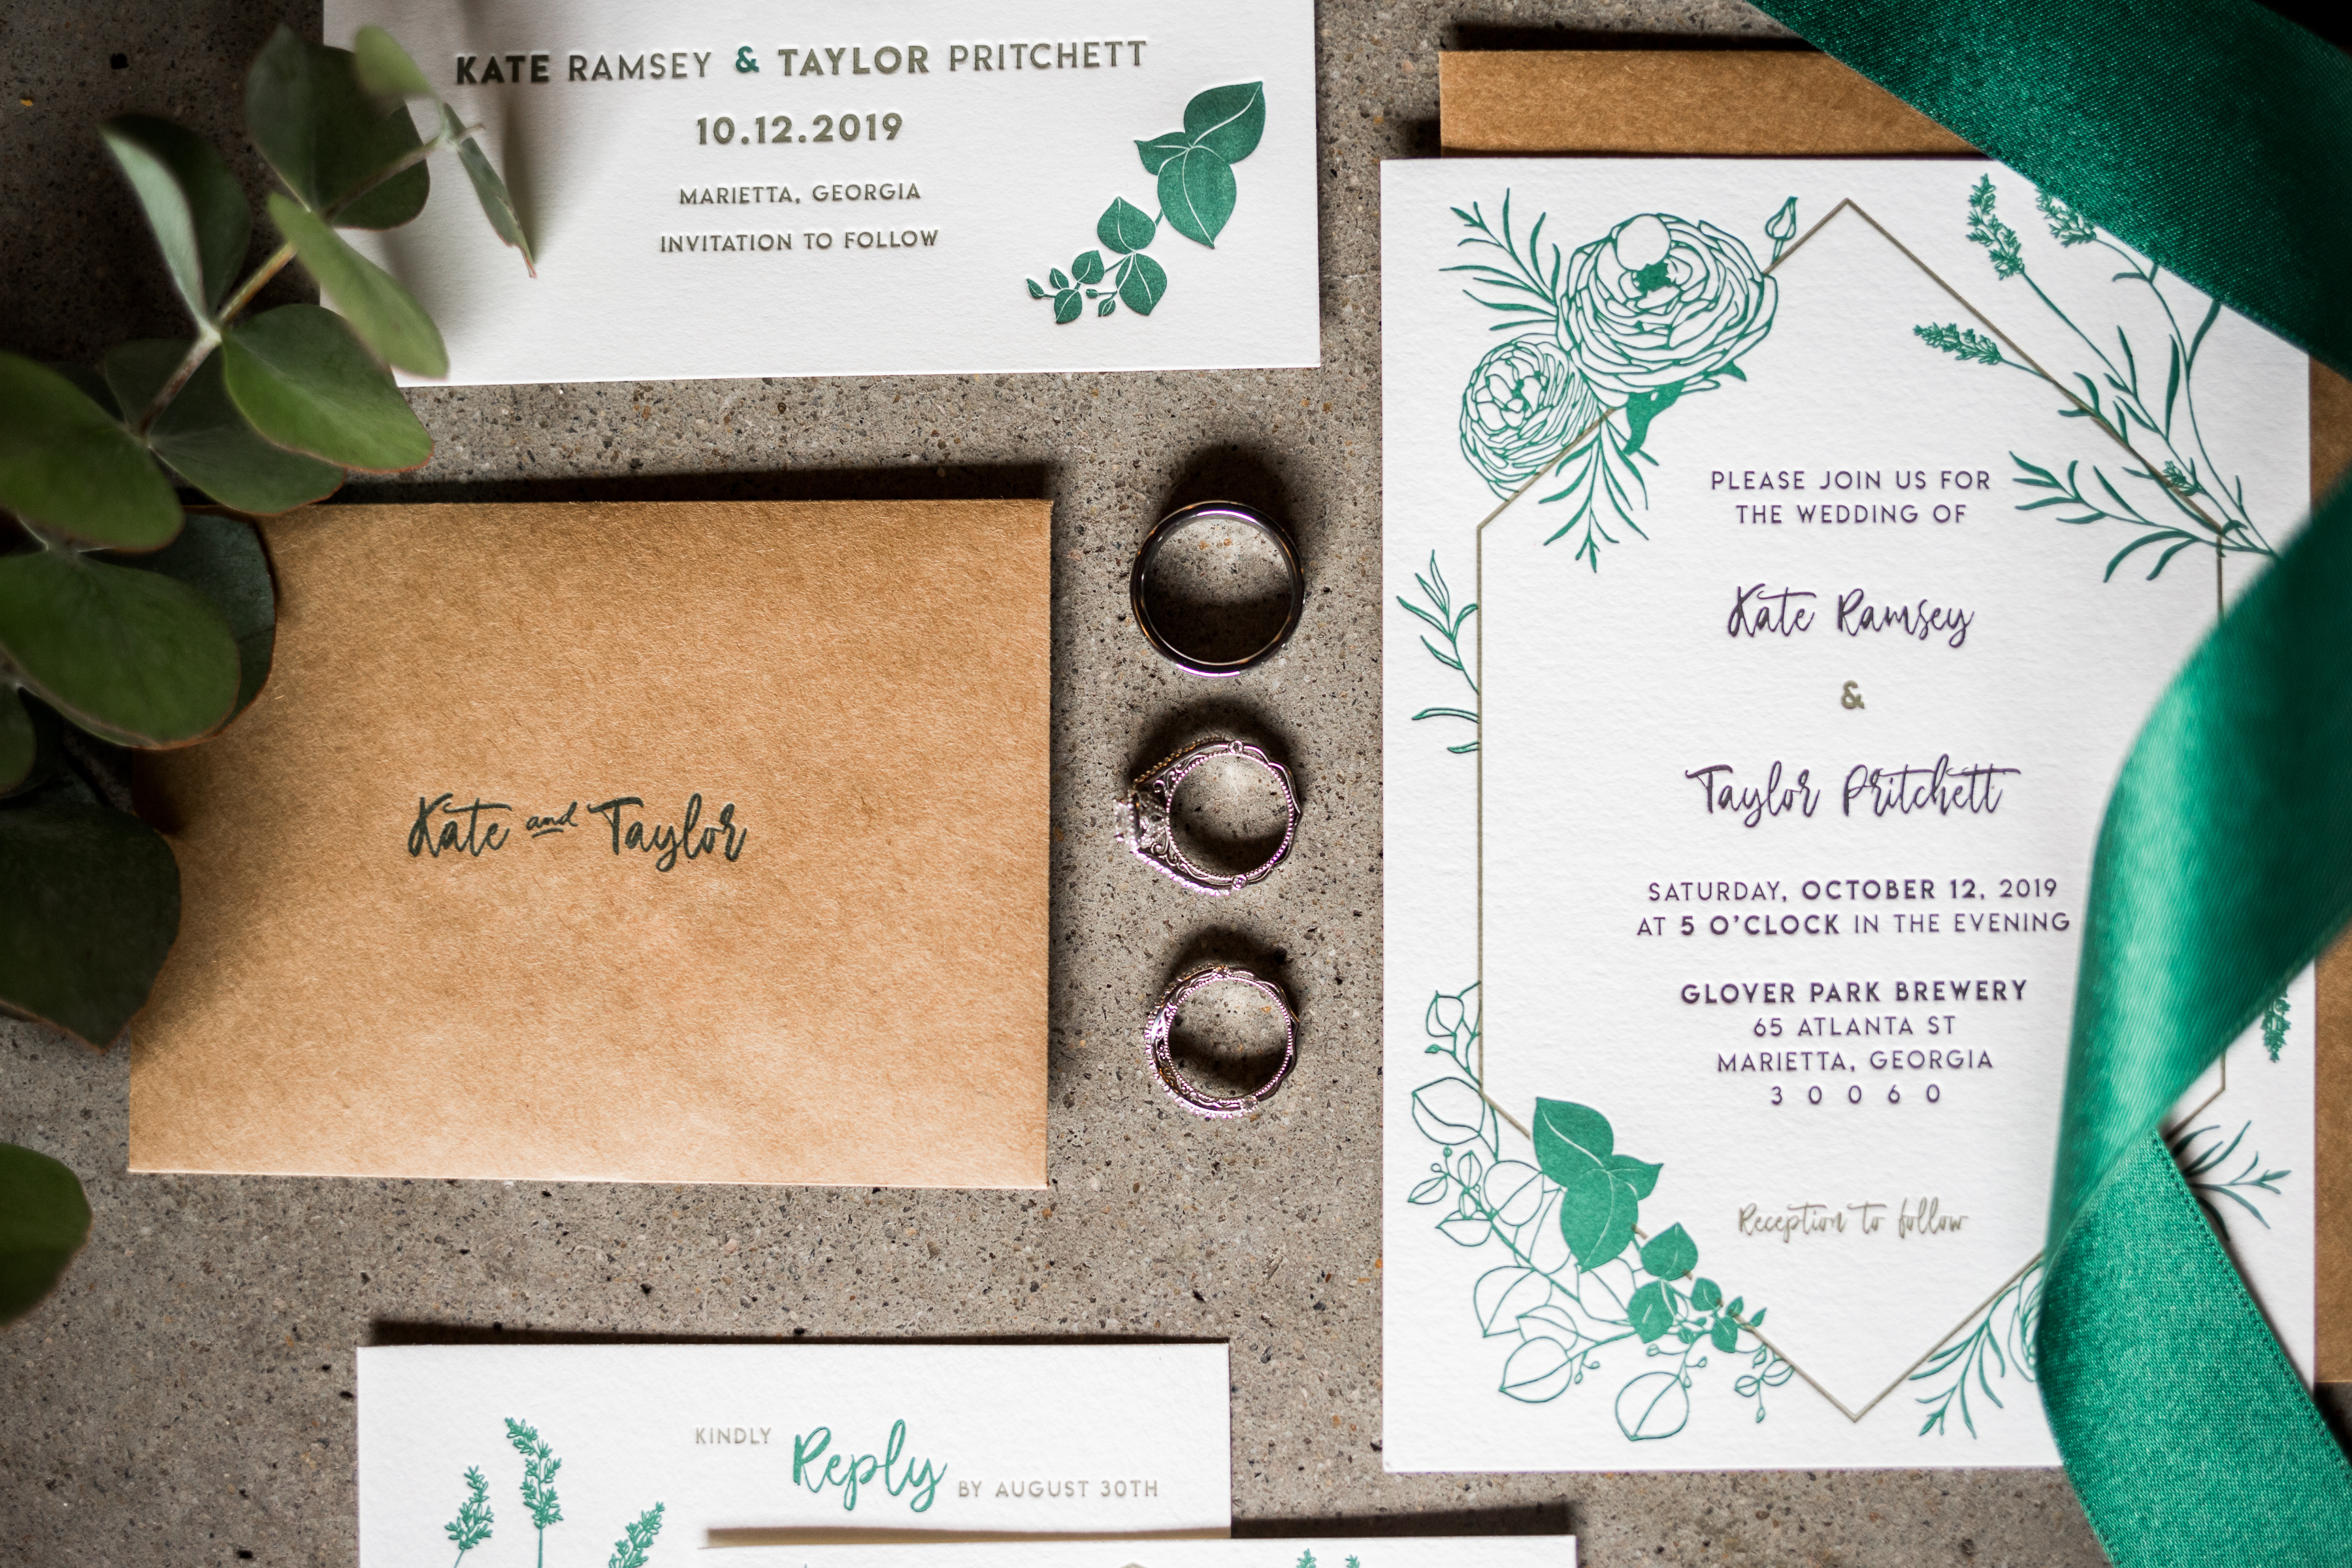 A full wedding Invitation set for photo packing list